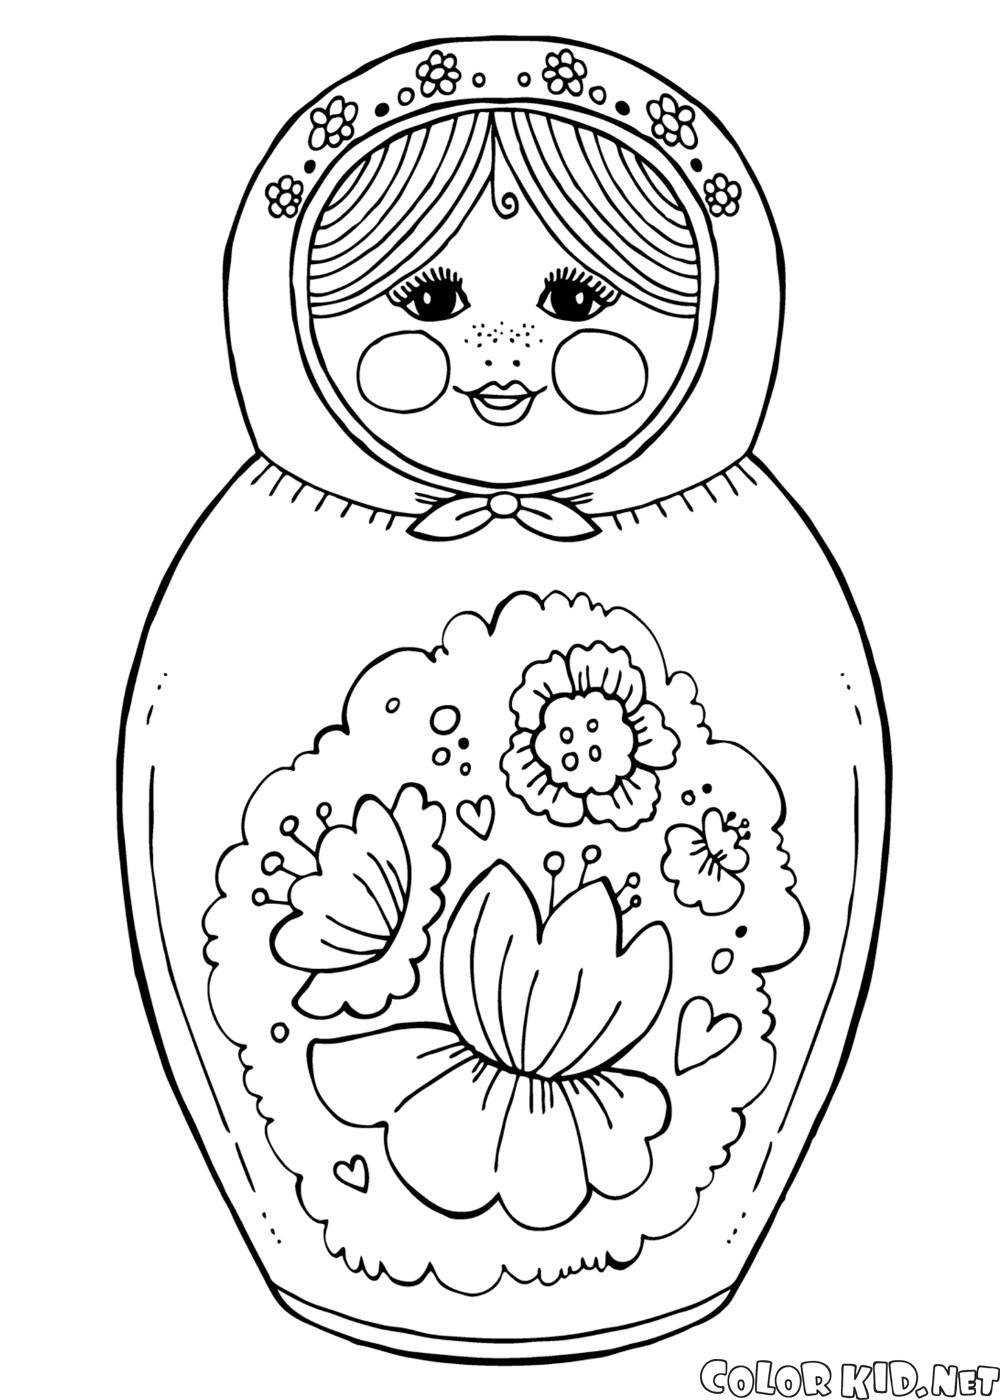 Coloring page - The boy in national costume